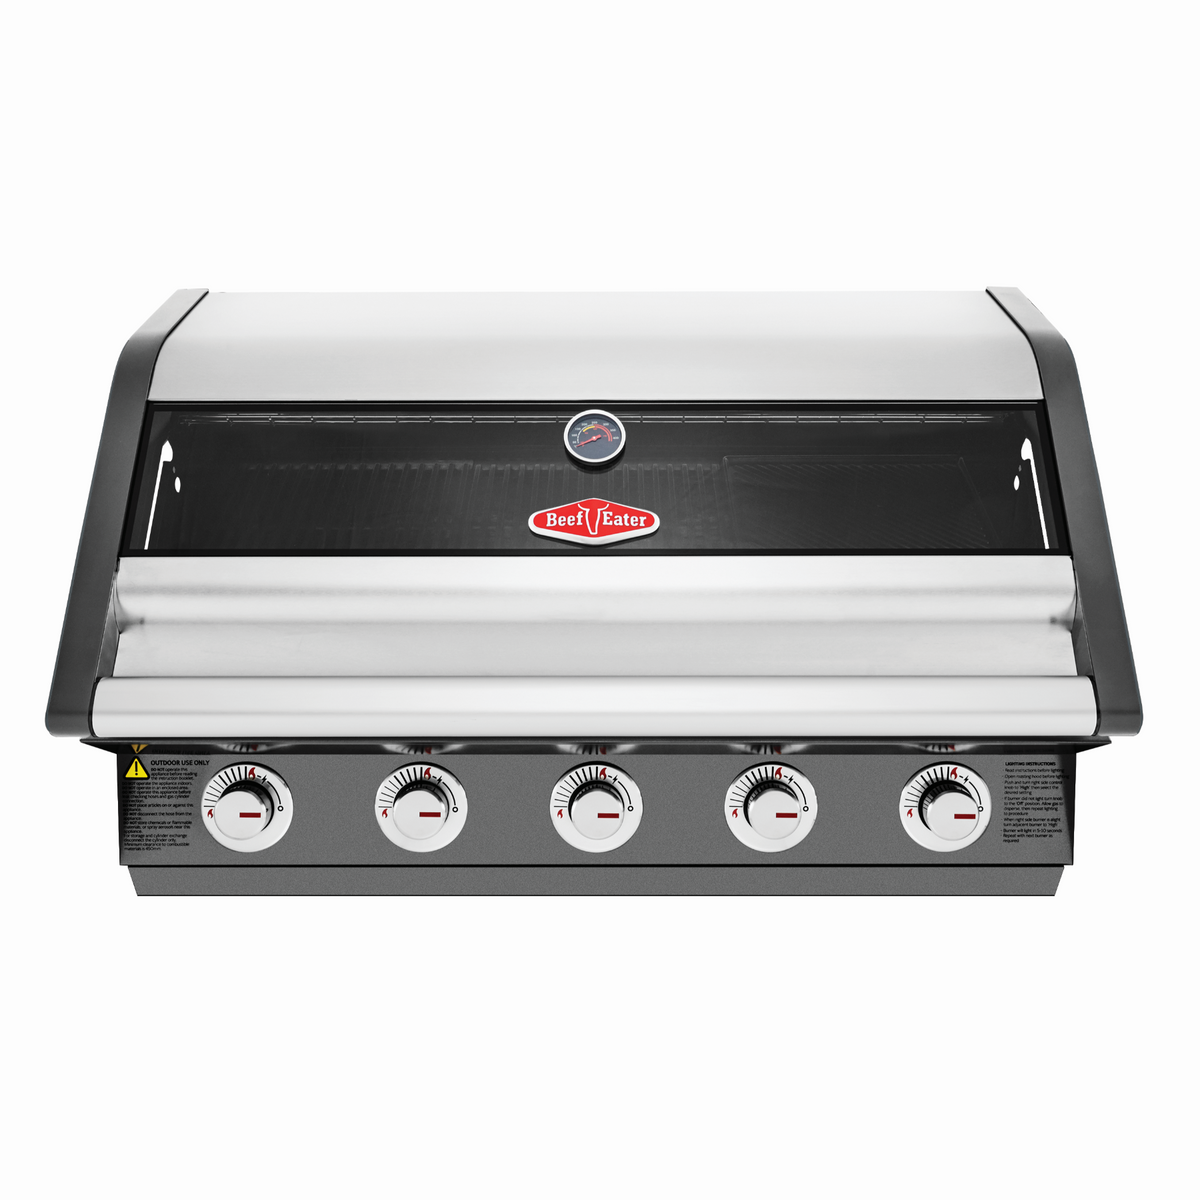 BeefEater 1600E Series 5 Burner Build In Gas Barbecue